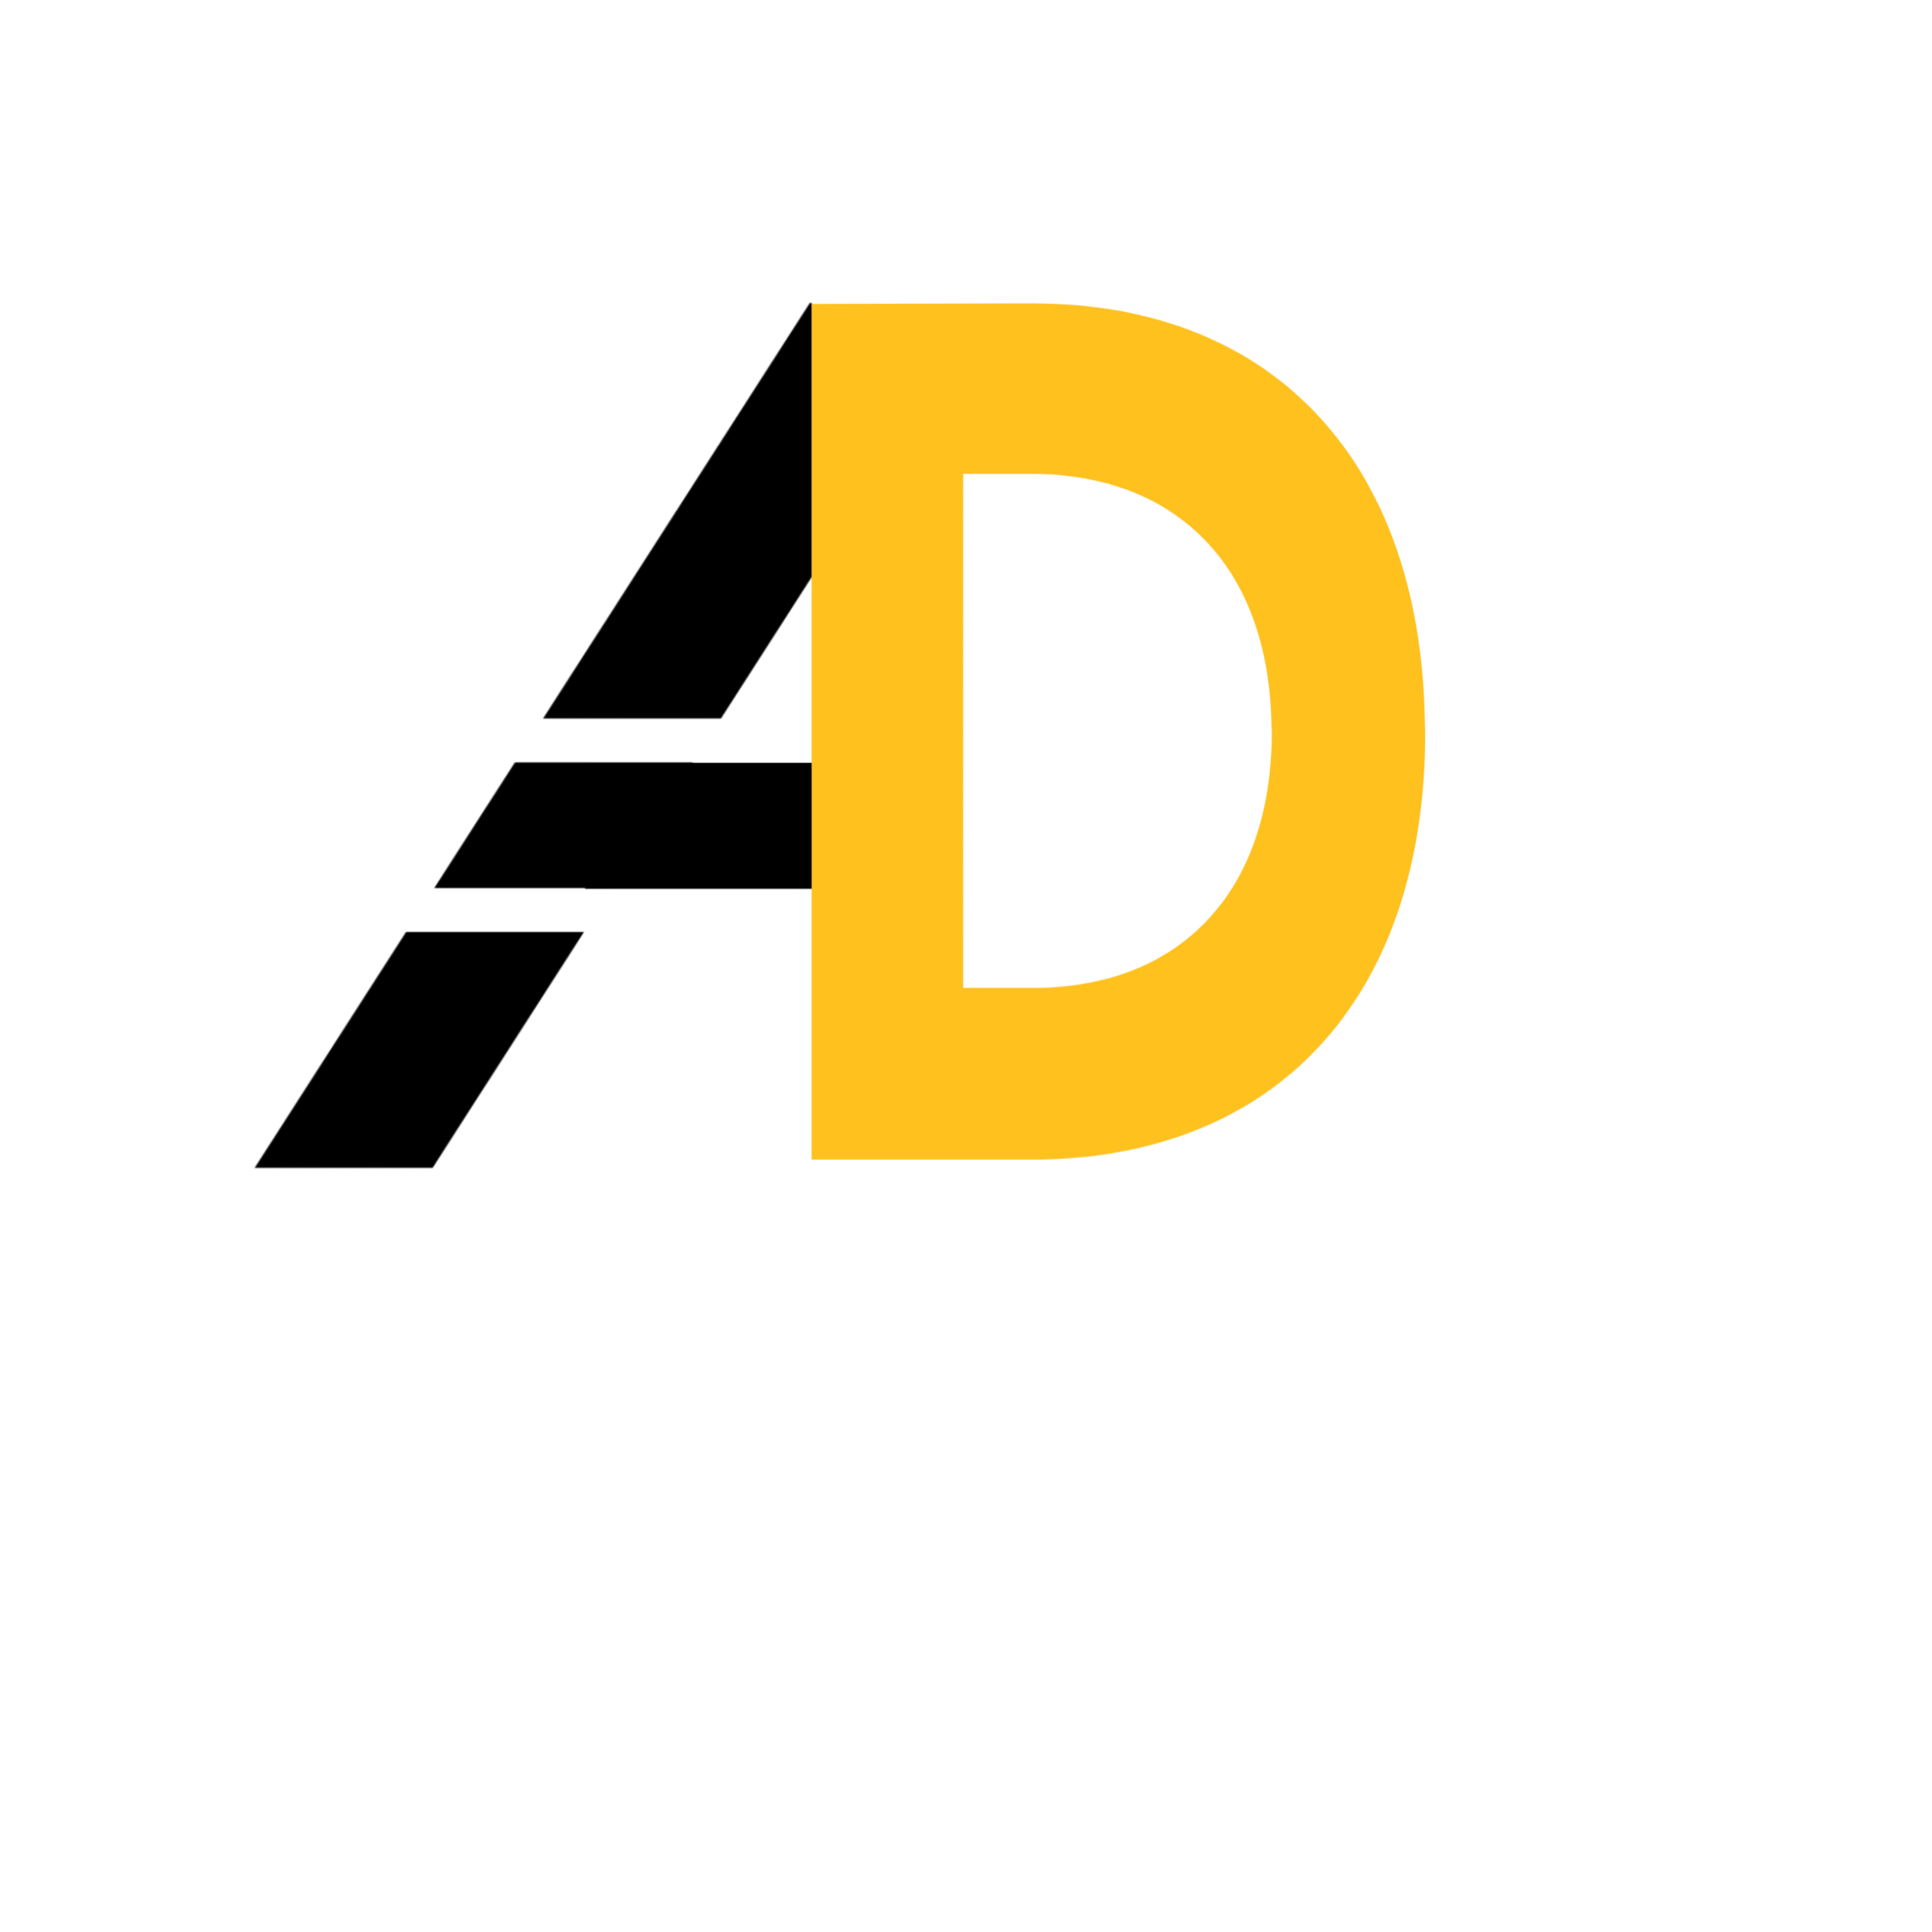 Black and yellow logo with the letter d.